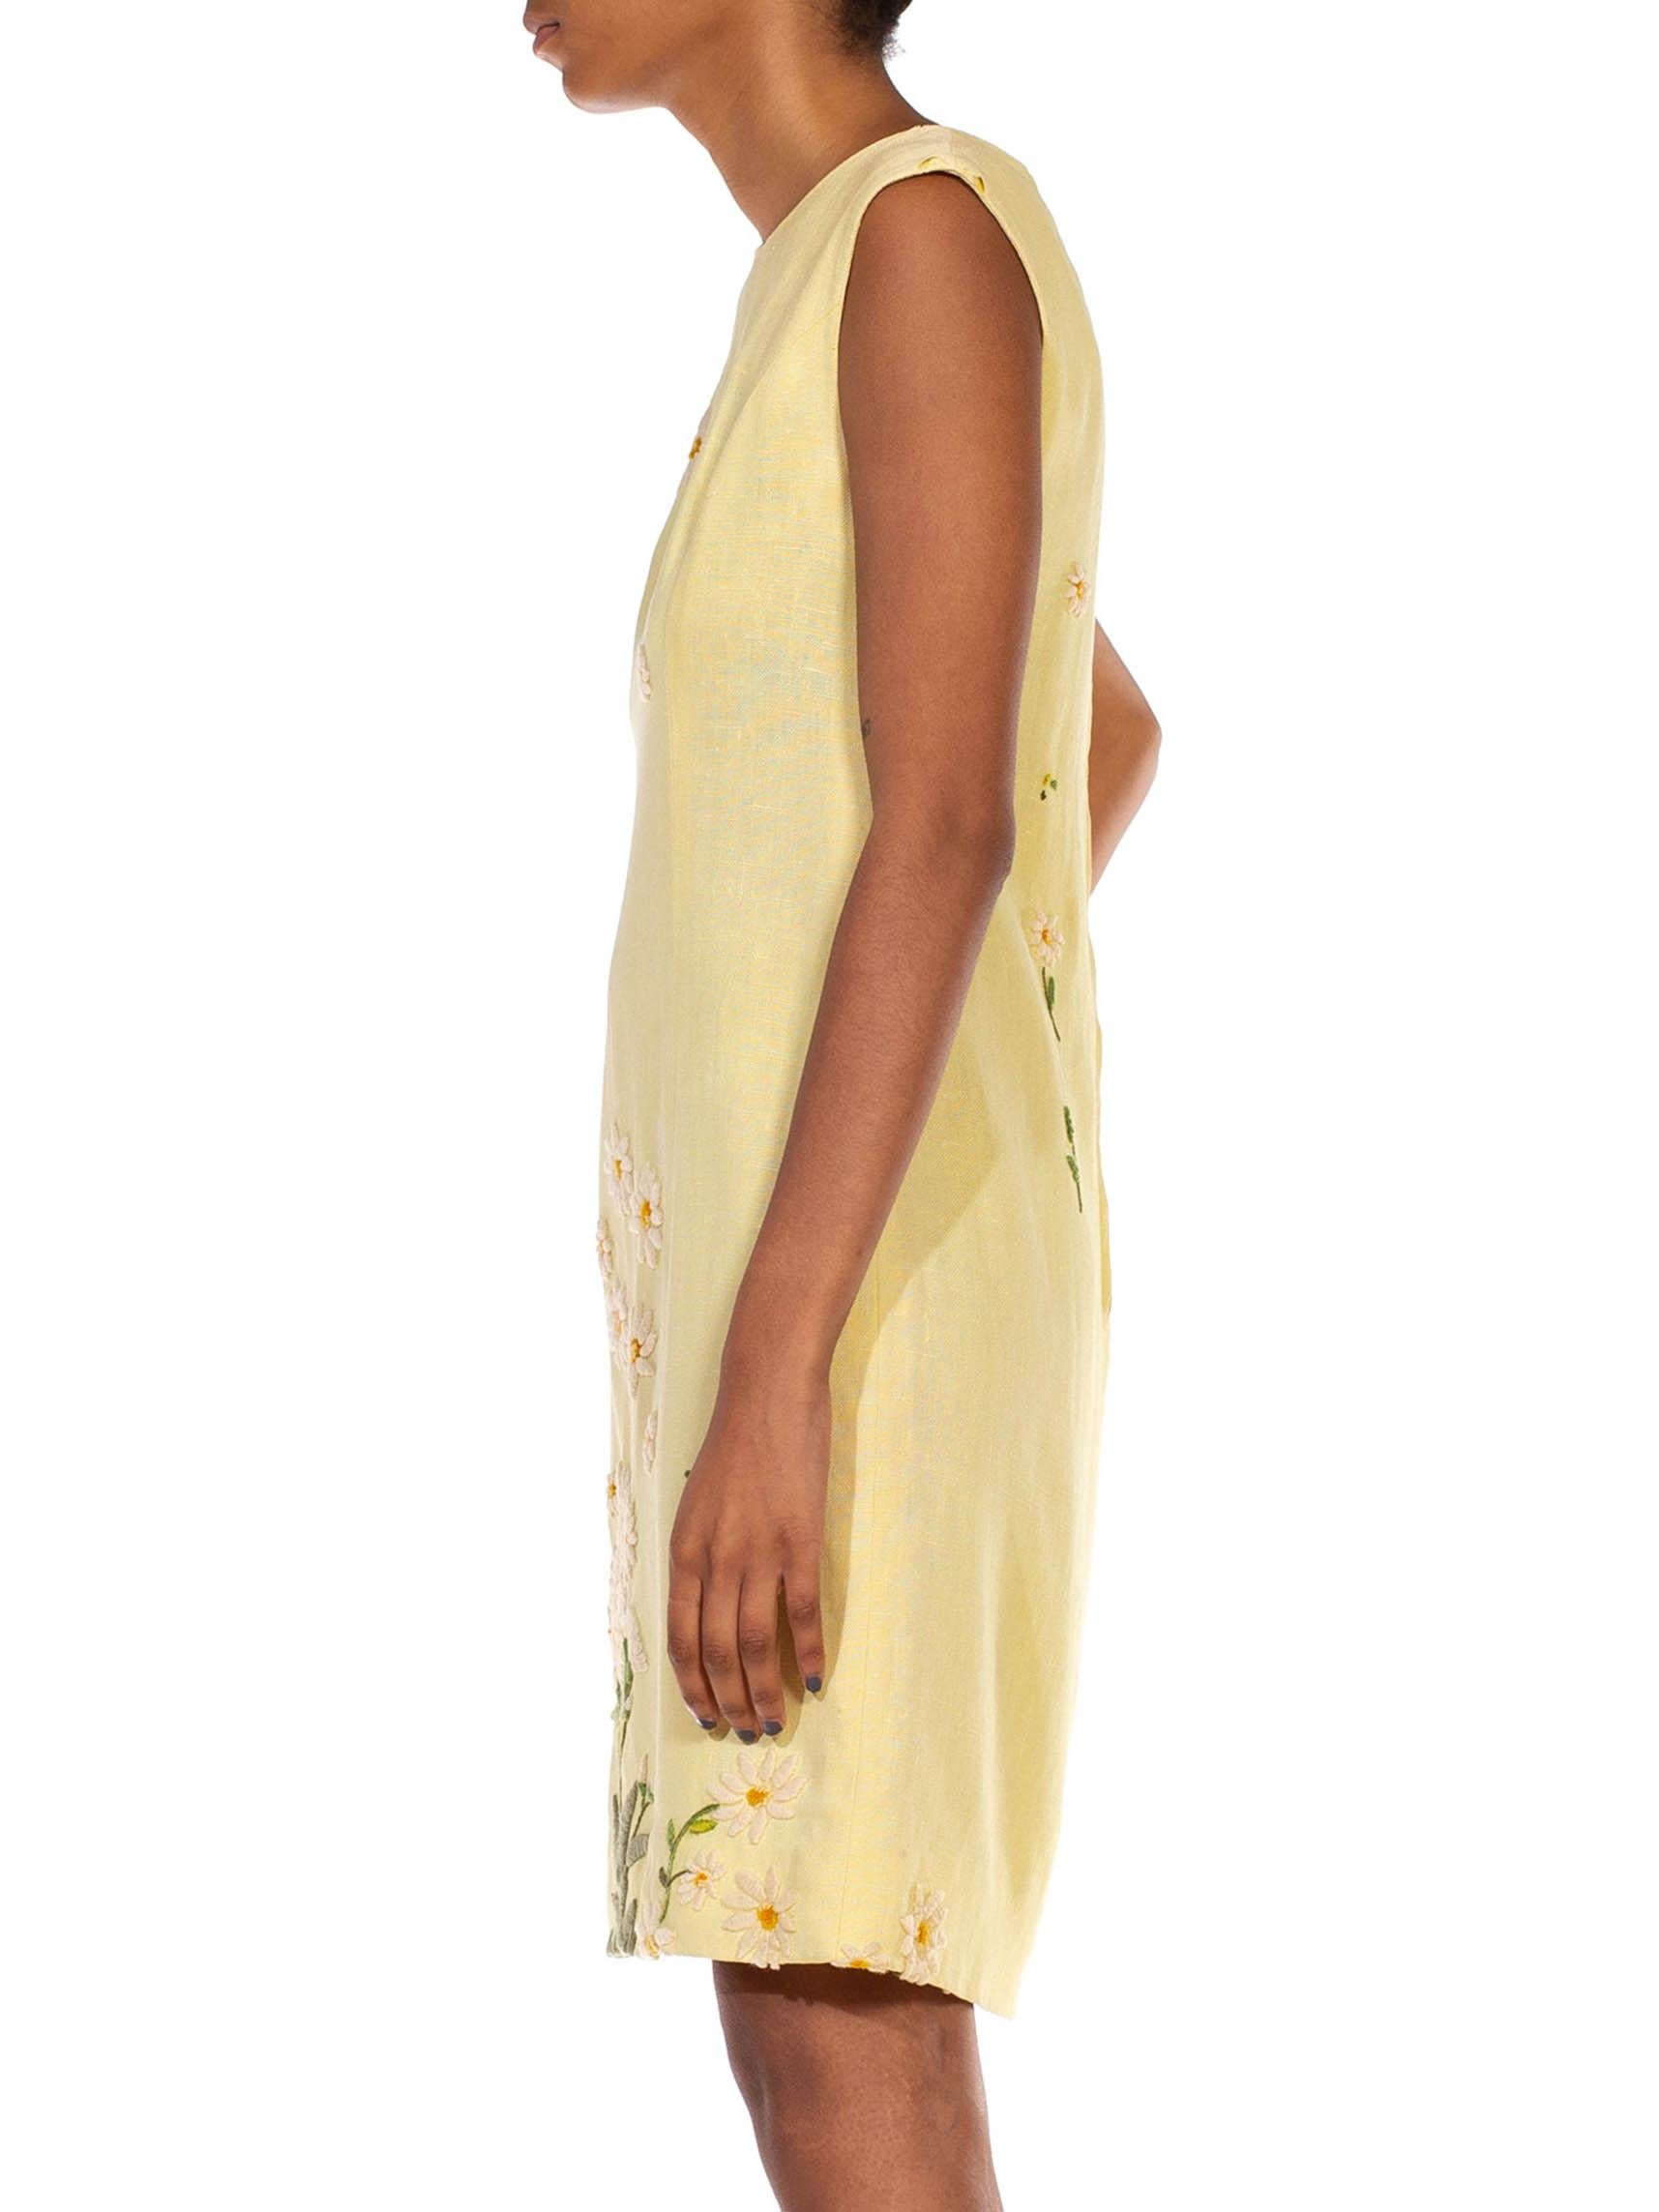 Brand: Florence Walsh 1960S Butter Yellow Linen Daisy Embroidered Mod Dress